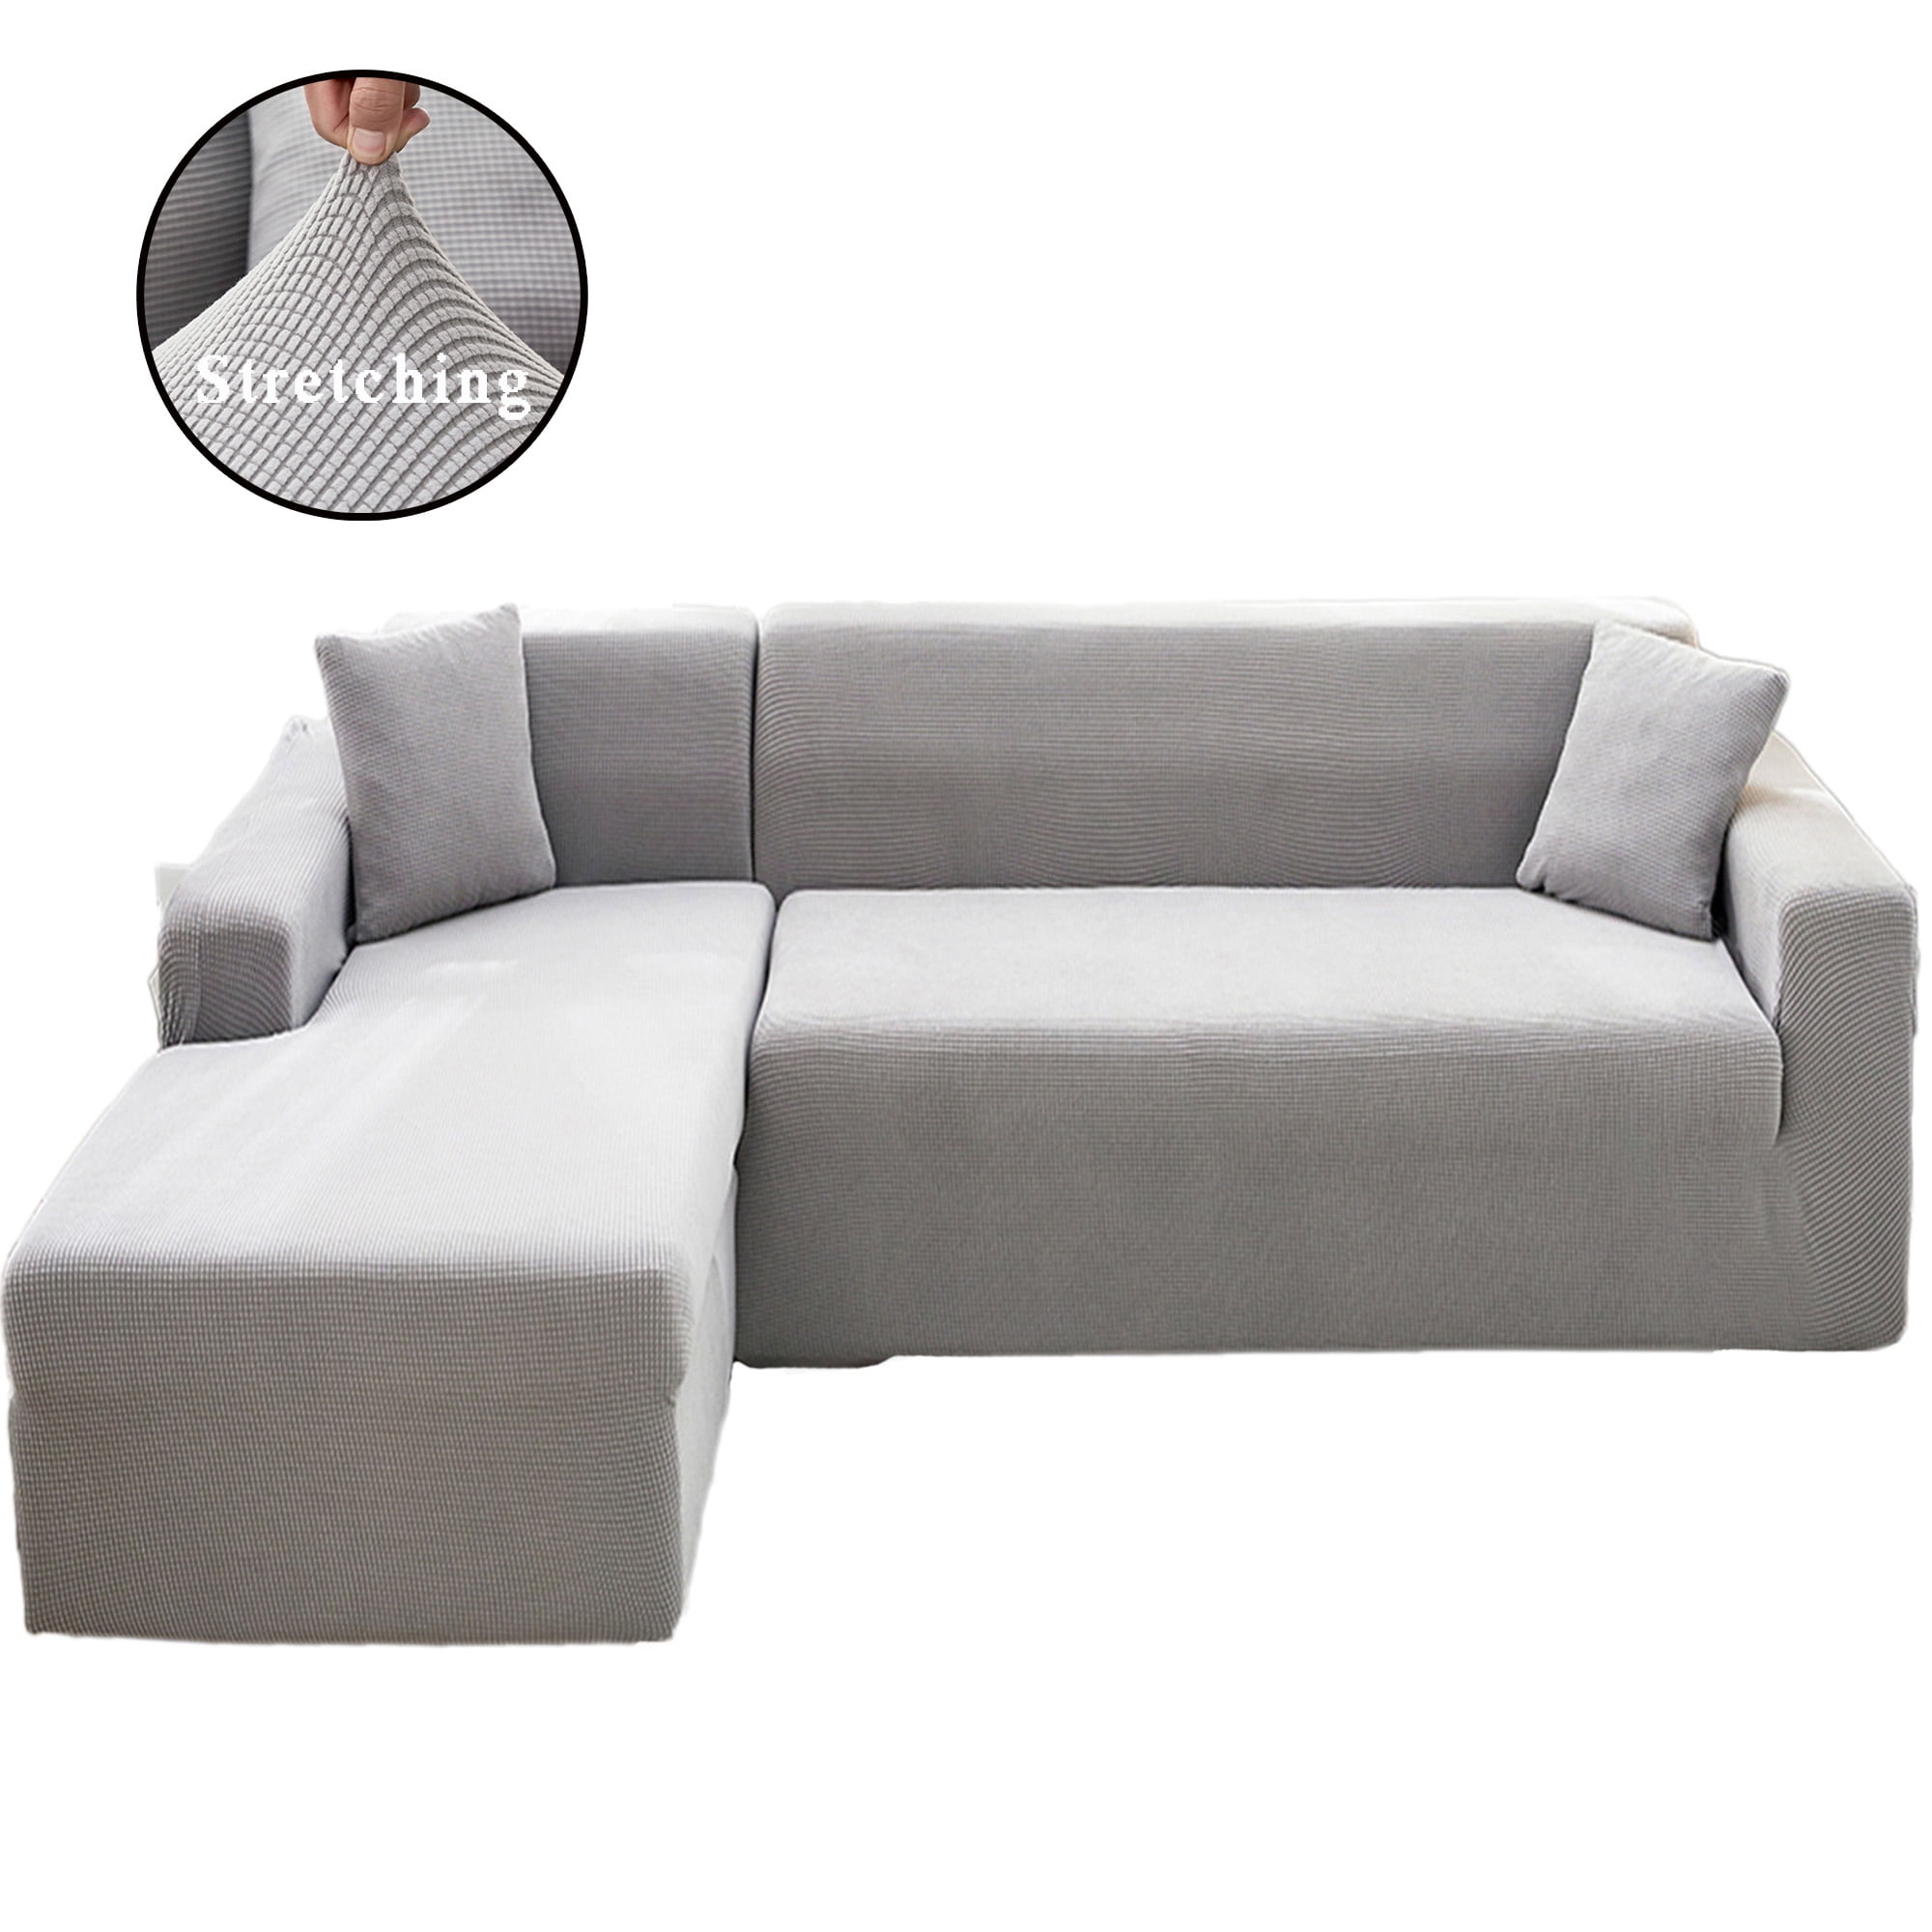 2pcs L-Shaped Jacquard Polyester Stretch Sectional Sofa Slipcovers Left Chaise